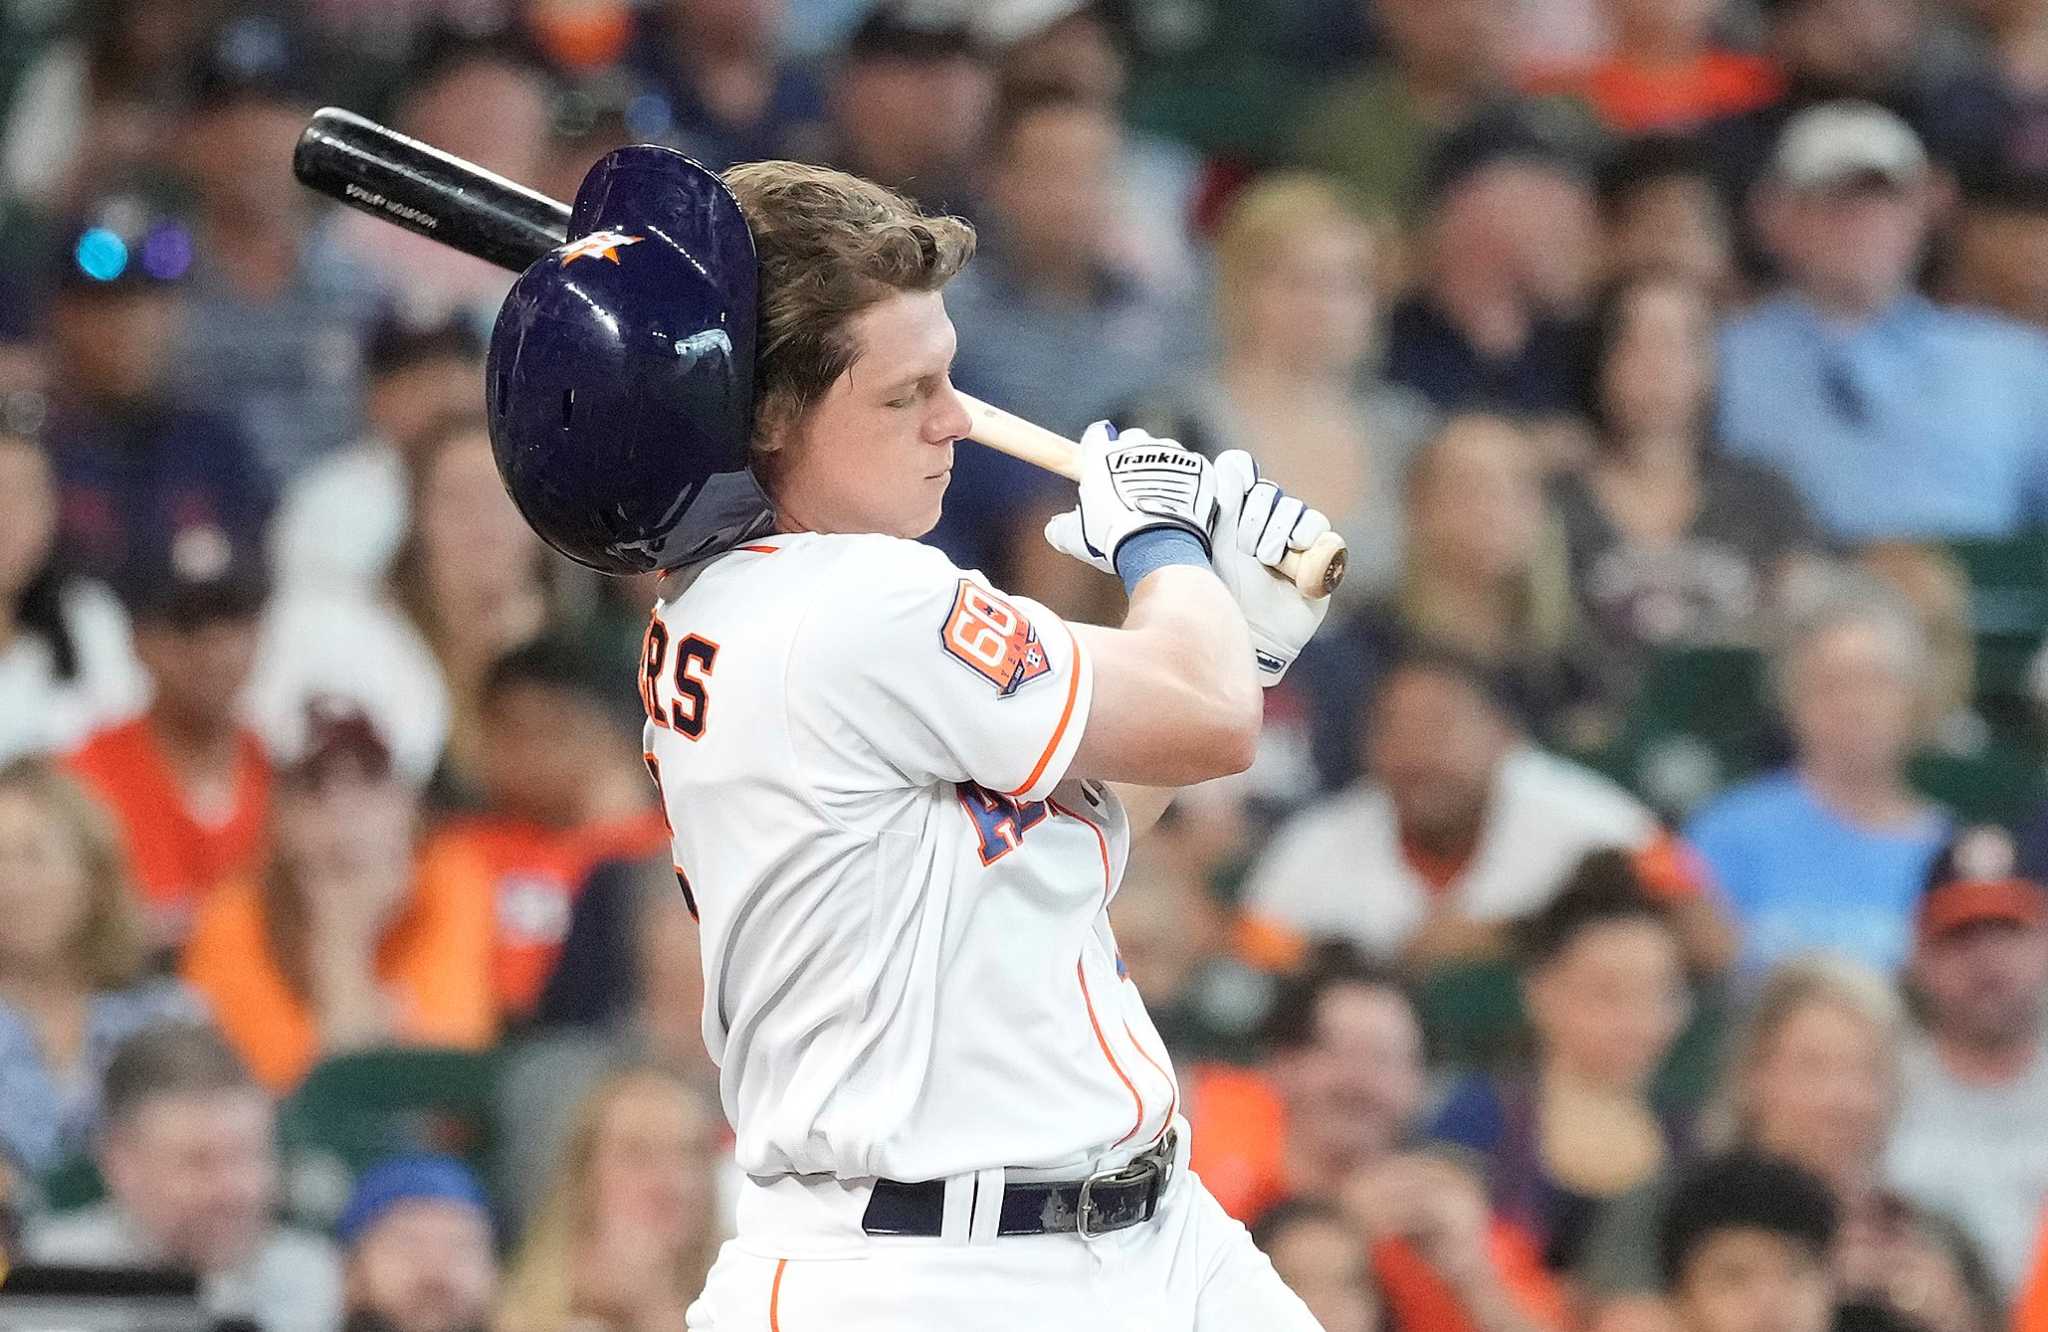 Astros' Jake Meyers struggles to find solution to hitting woes